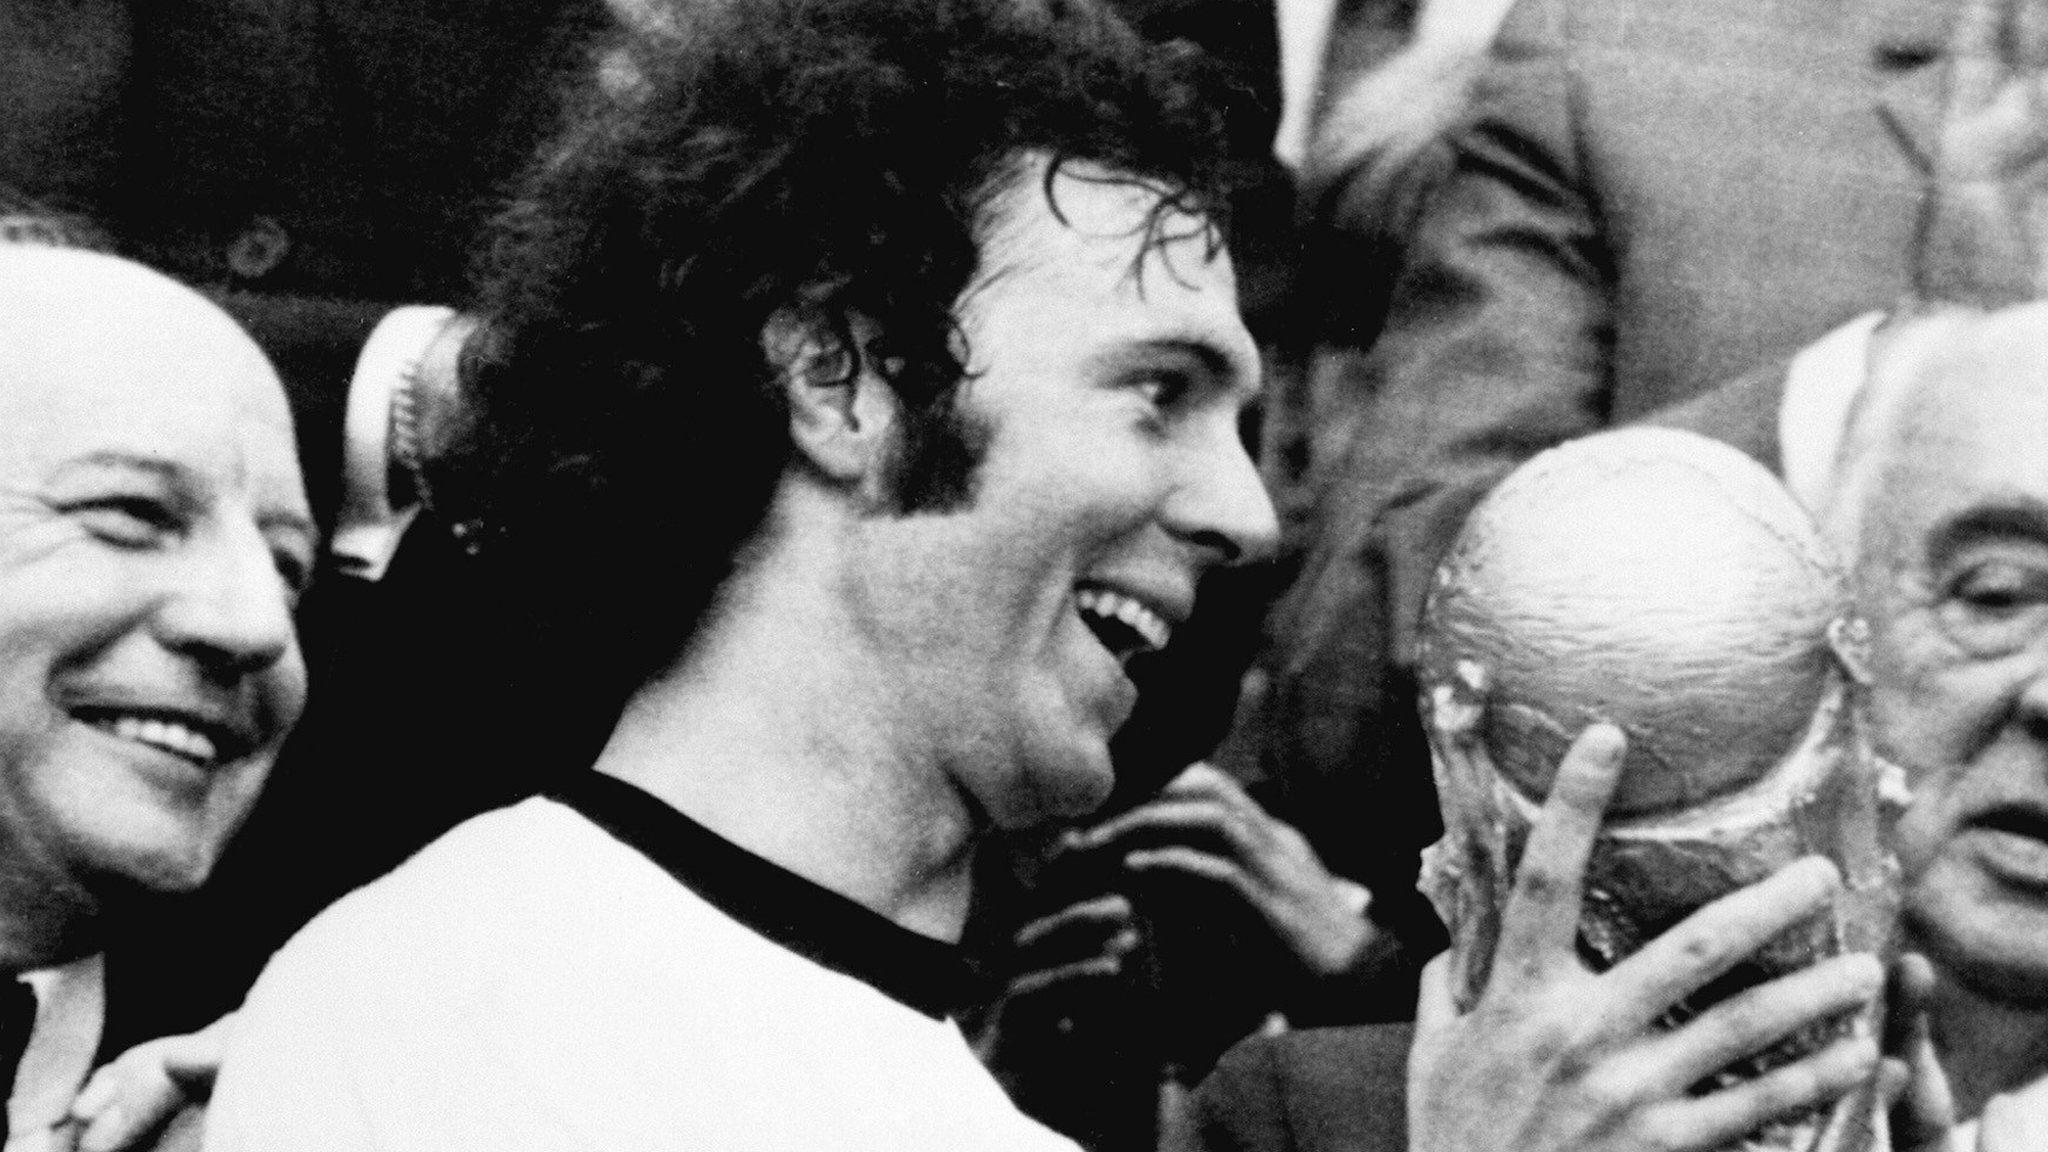 Franz Beckenbauer questioned by prosecutors in 2006 World Cup fraud